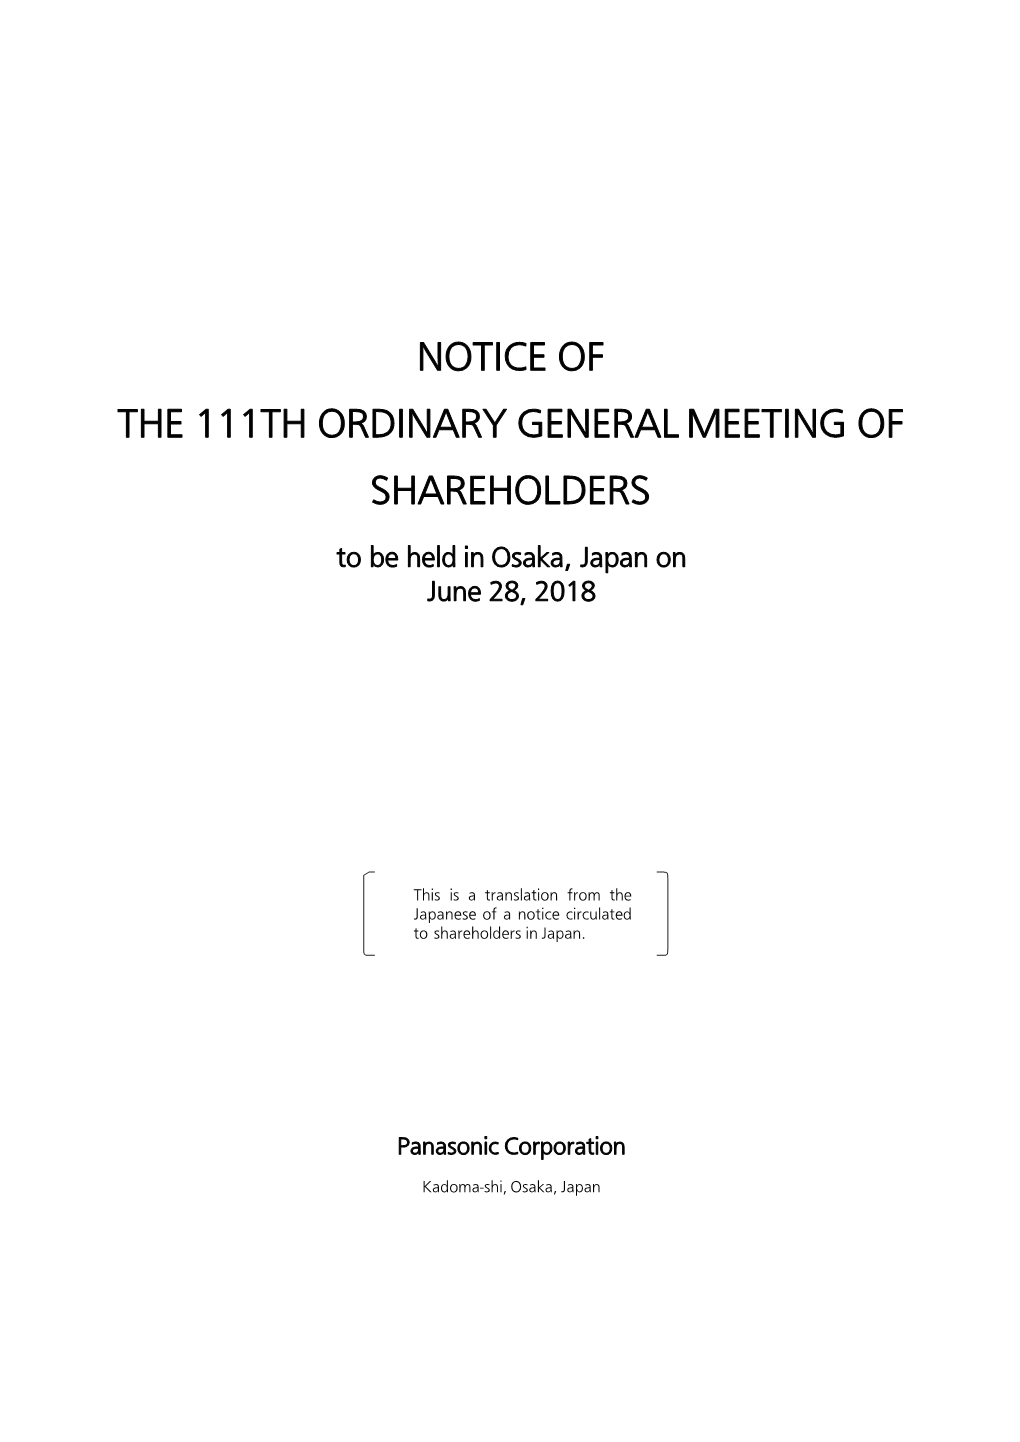 Notice of the 111Th Ordinary General Meeting of Shareholders